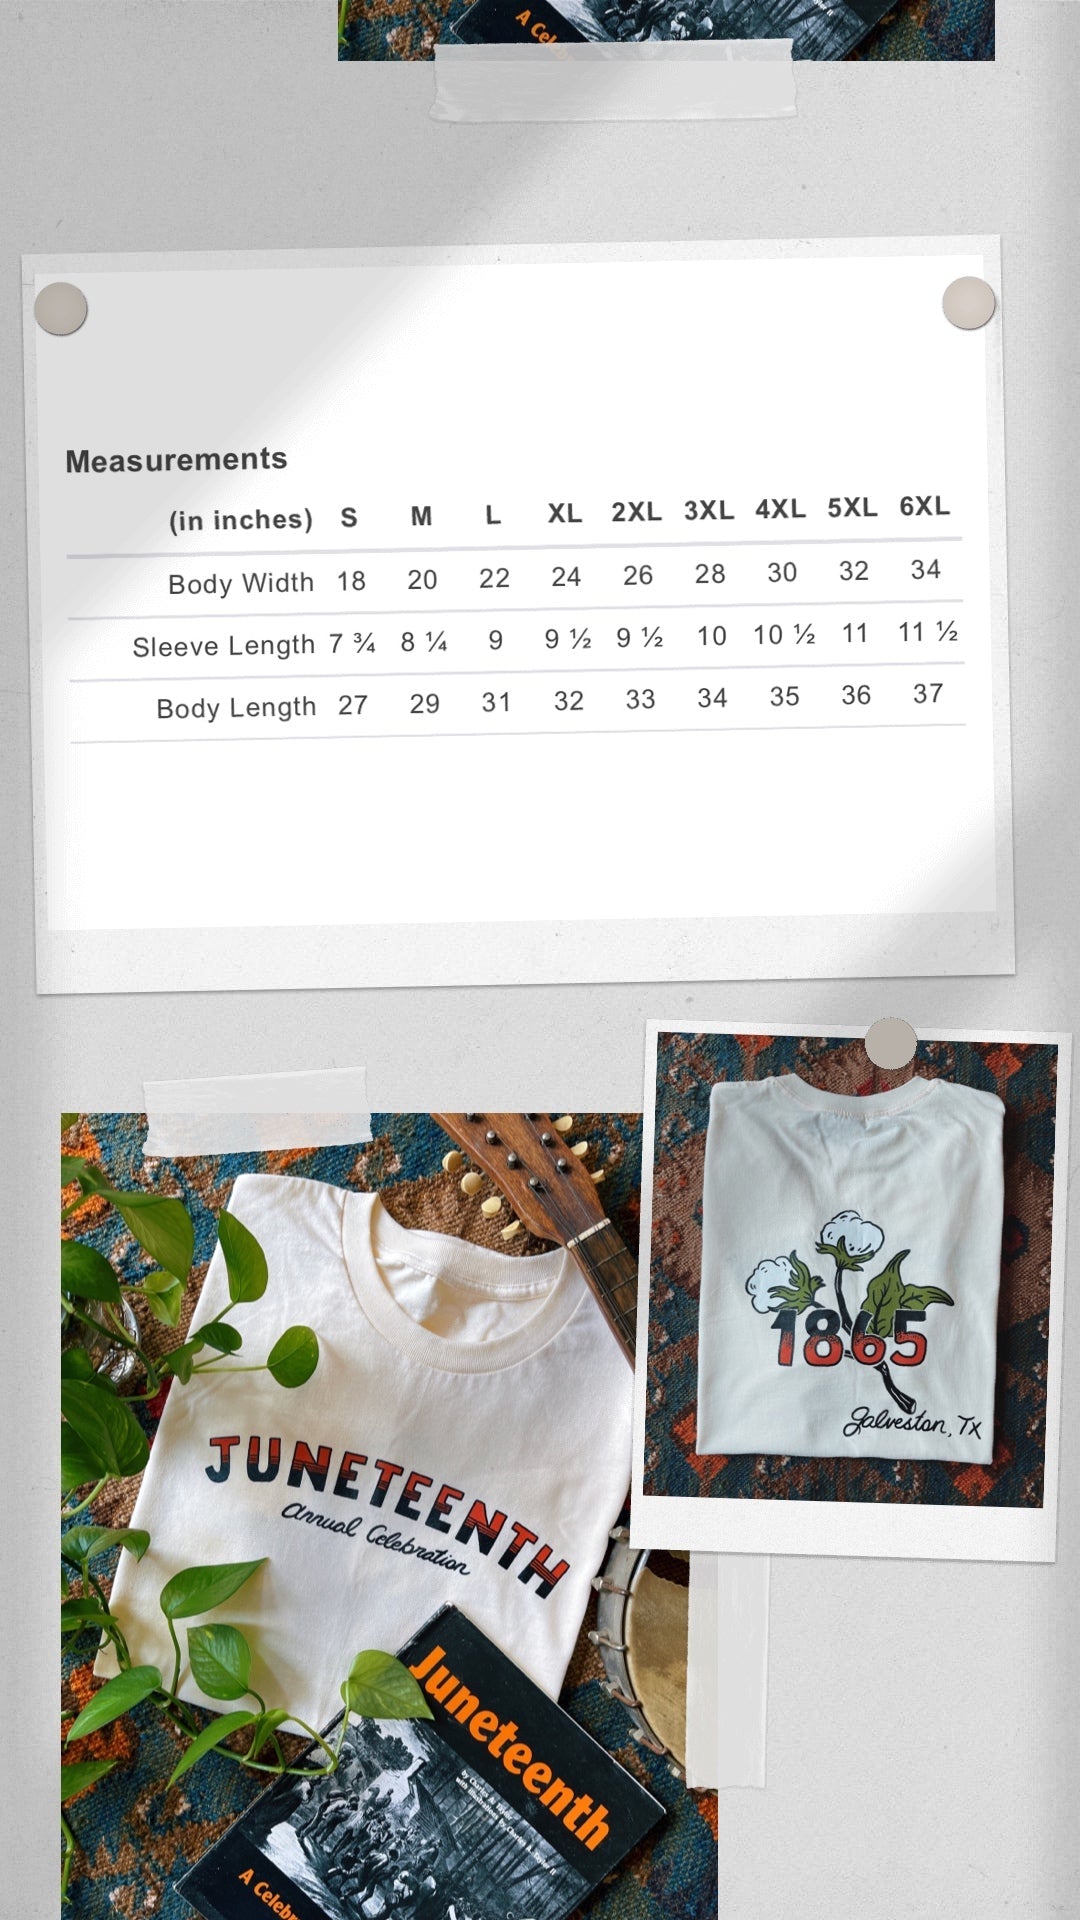 Juneteenth Archive // 2022 Signature Tee